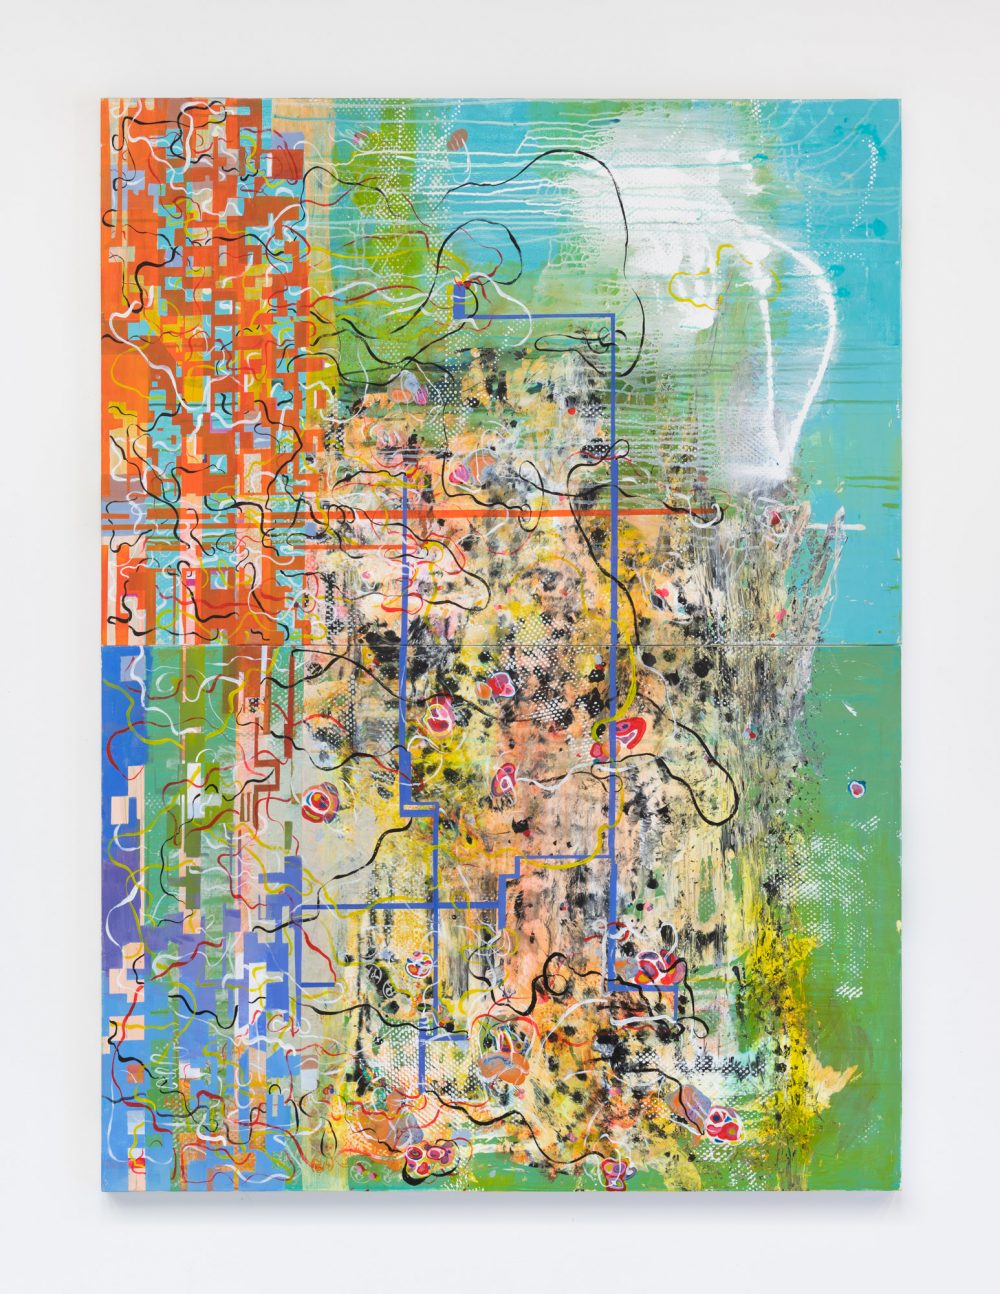 Vertical abstract multicolored painting consisting of layers of shapes. The space divided in two, with mostly blue and orange on top and green and blue on the bottom. Discreet layers of differing shapes and lines in contrasting colors are layered on one another to create an atmosphere of apparent nonstop activity.